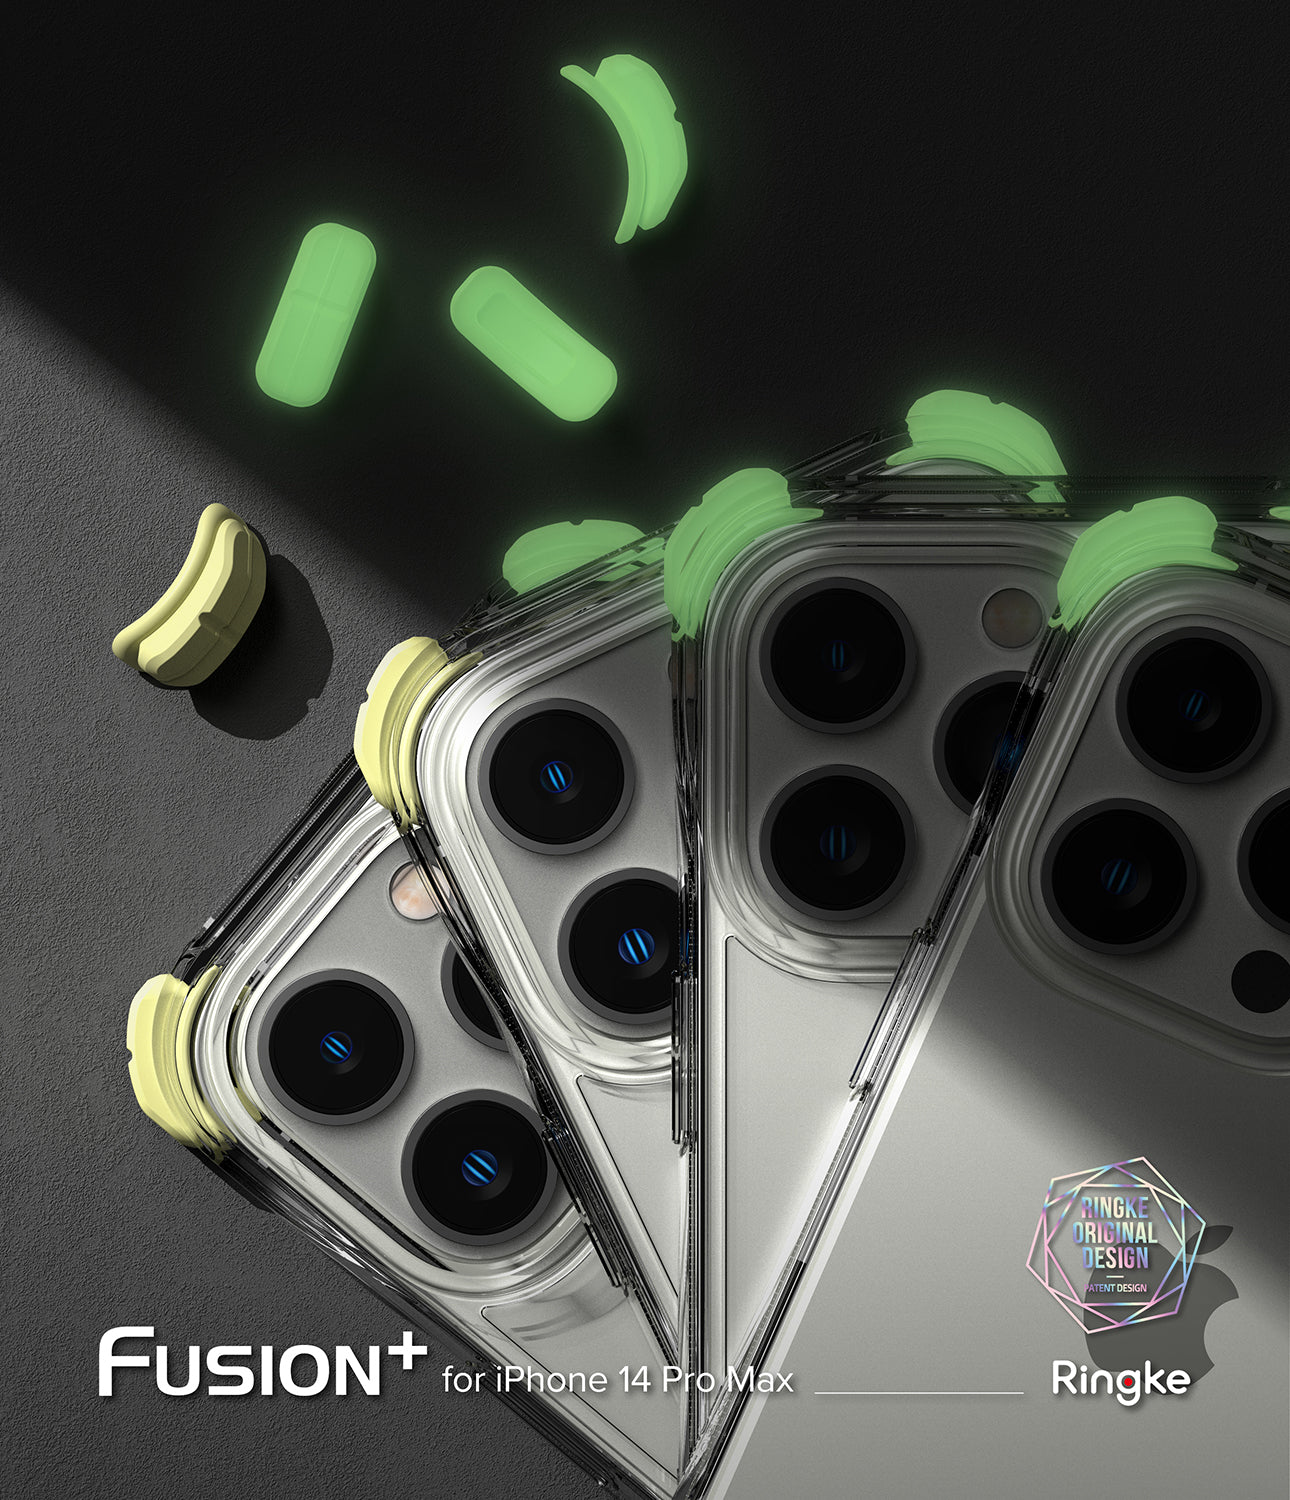 Fusion+ for iPhone 14 Pro Max - Ringke